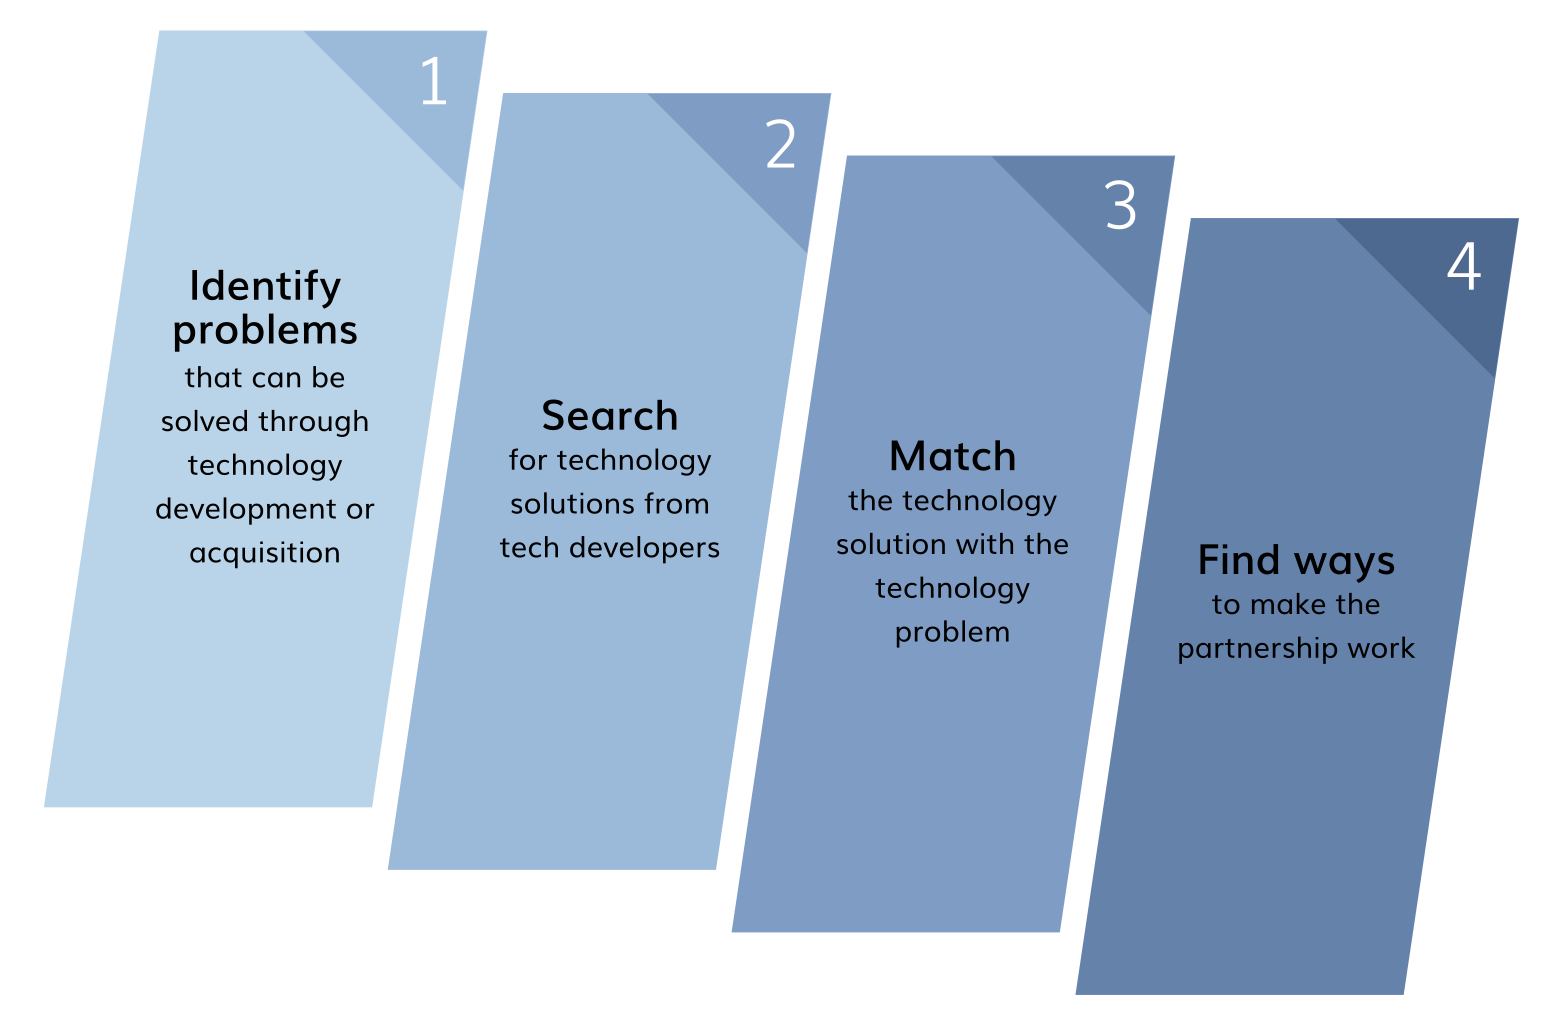 1. Identify problems that can be solved through technology development or acquisition. 2. Search for technology solutions from tech developers. 3. Match the technology solution with the technology problem. 4. Find ways to make the partnership work.